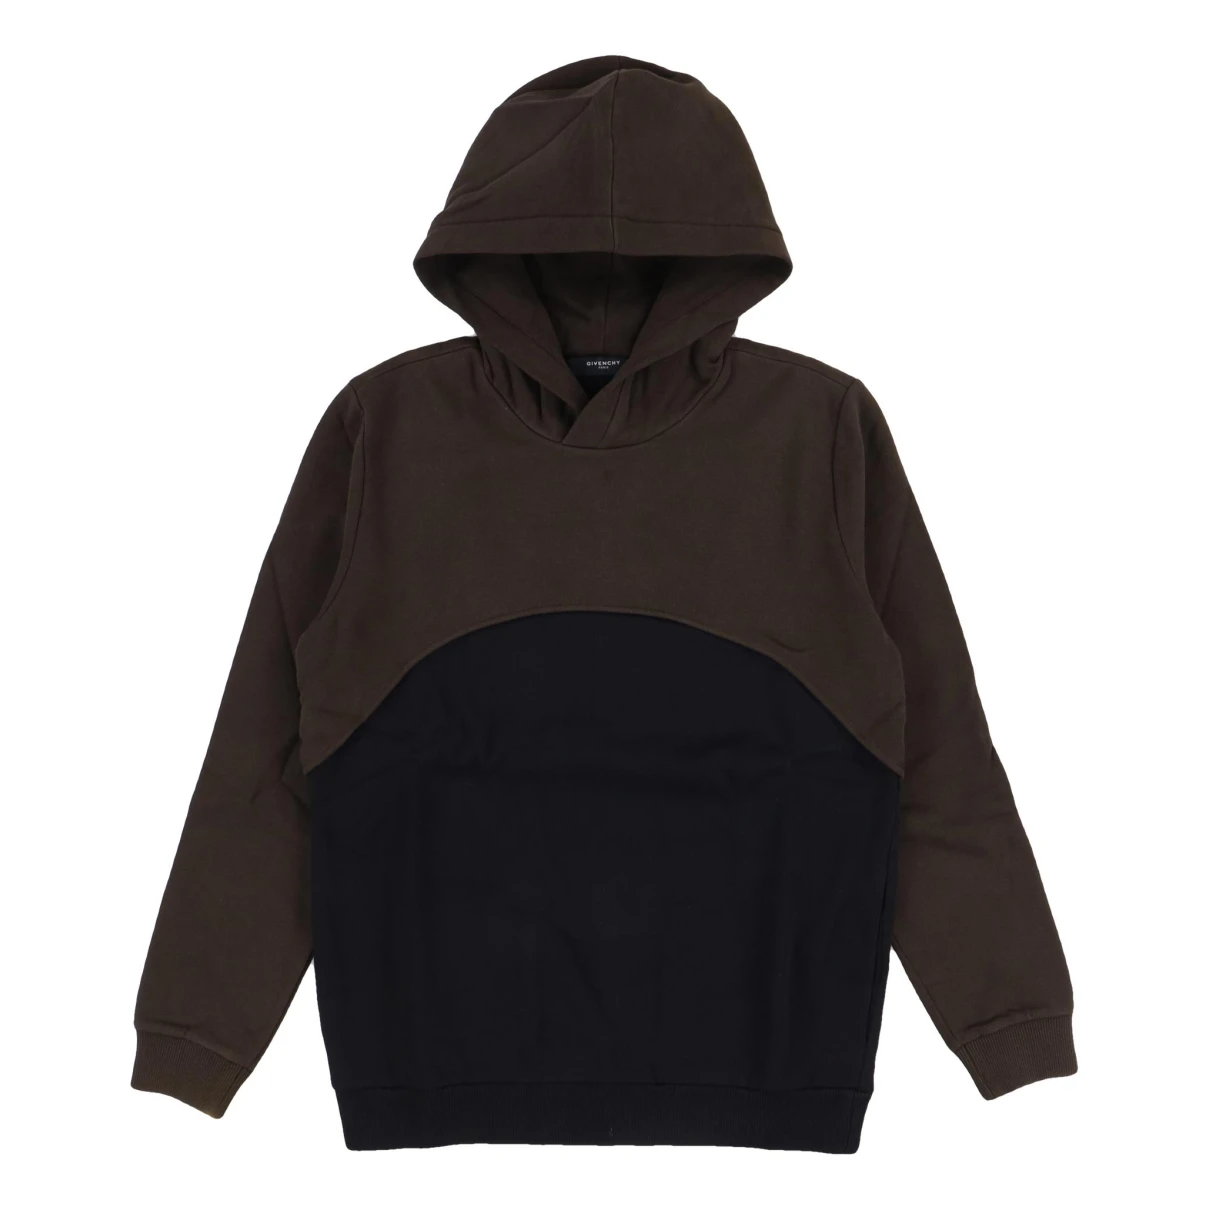 Pre-owned Givenchy Sweatshirt In Brown